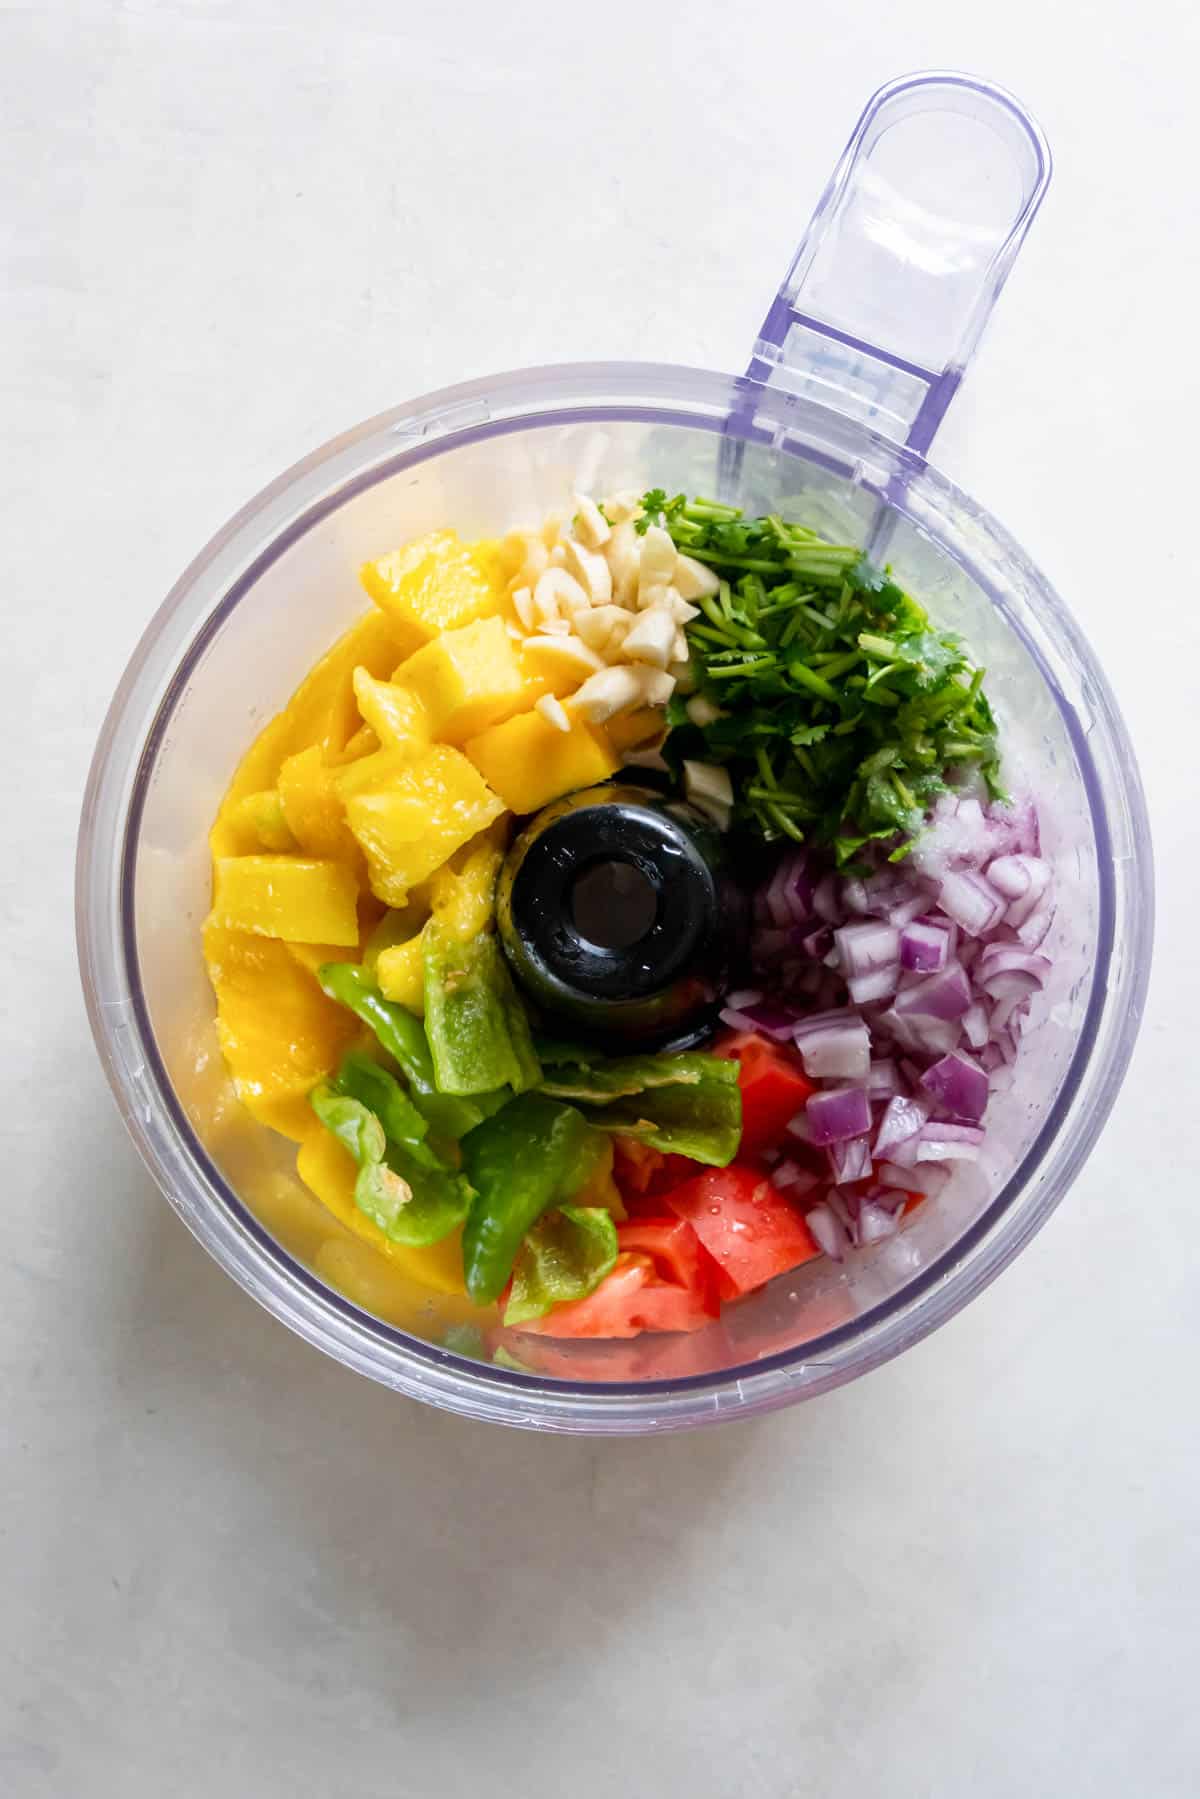 All of the ingredients for mango hanabero salsa in a food processor before blending.